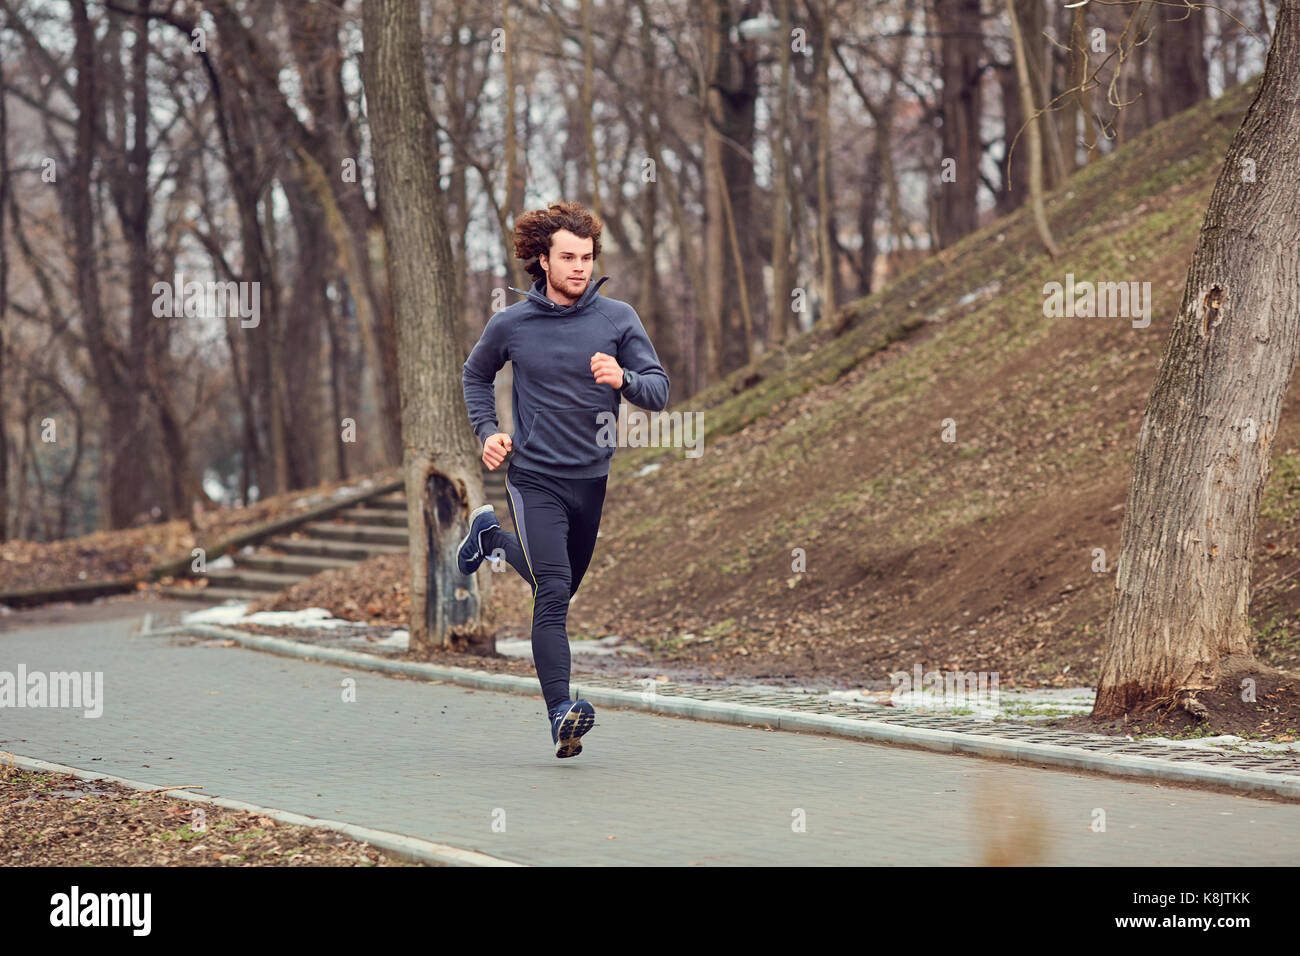 A young male runner runs in the park. Stock Photo